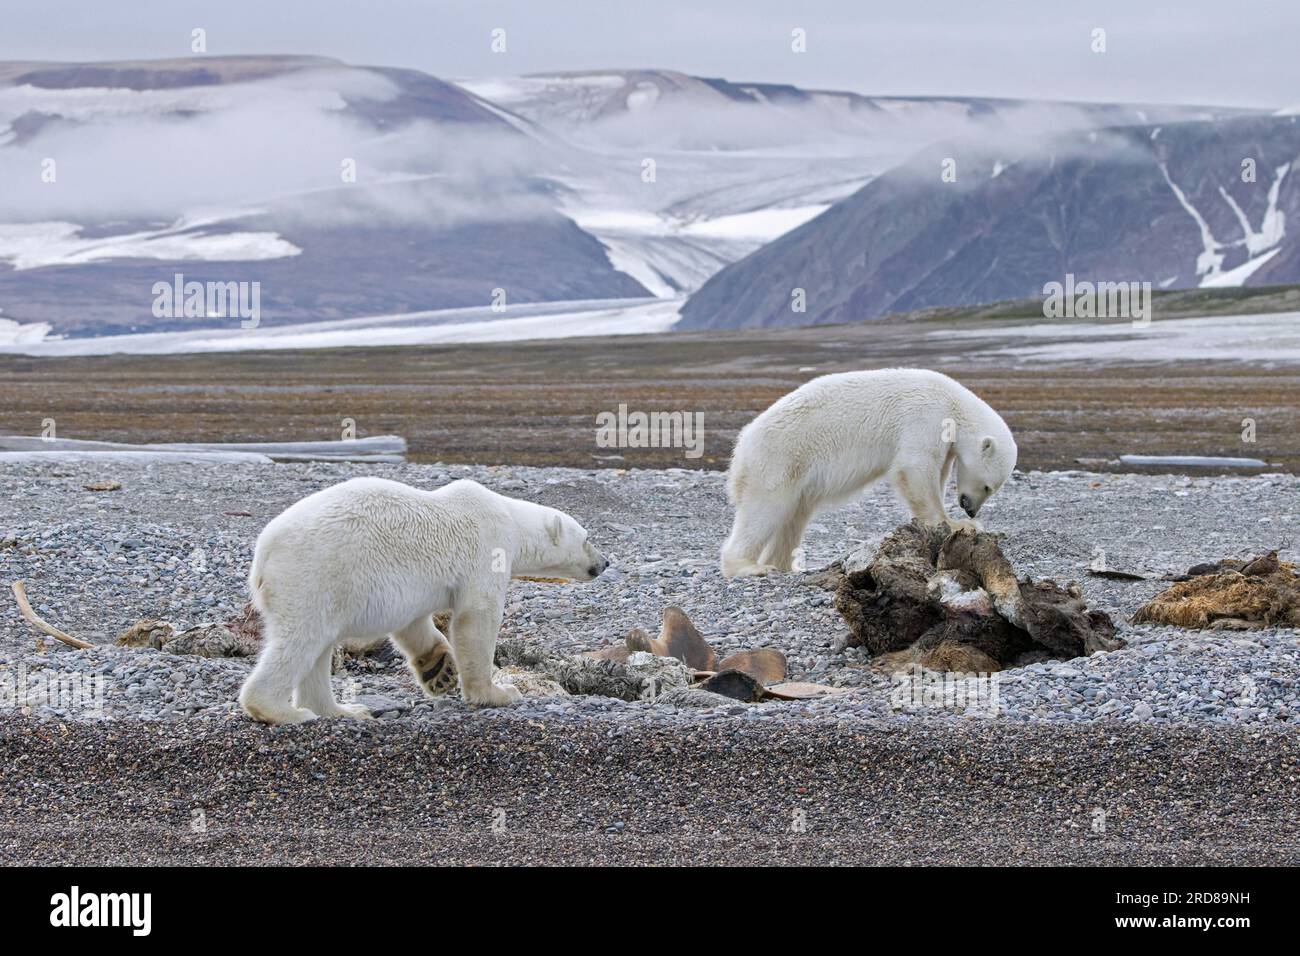 Two young scavenging polar bears (Ursus maritimus) feeding on carcass of dead stranded whale along the Svalbard coast, Spitsbergen, Norway Stock Photo